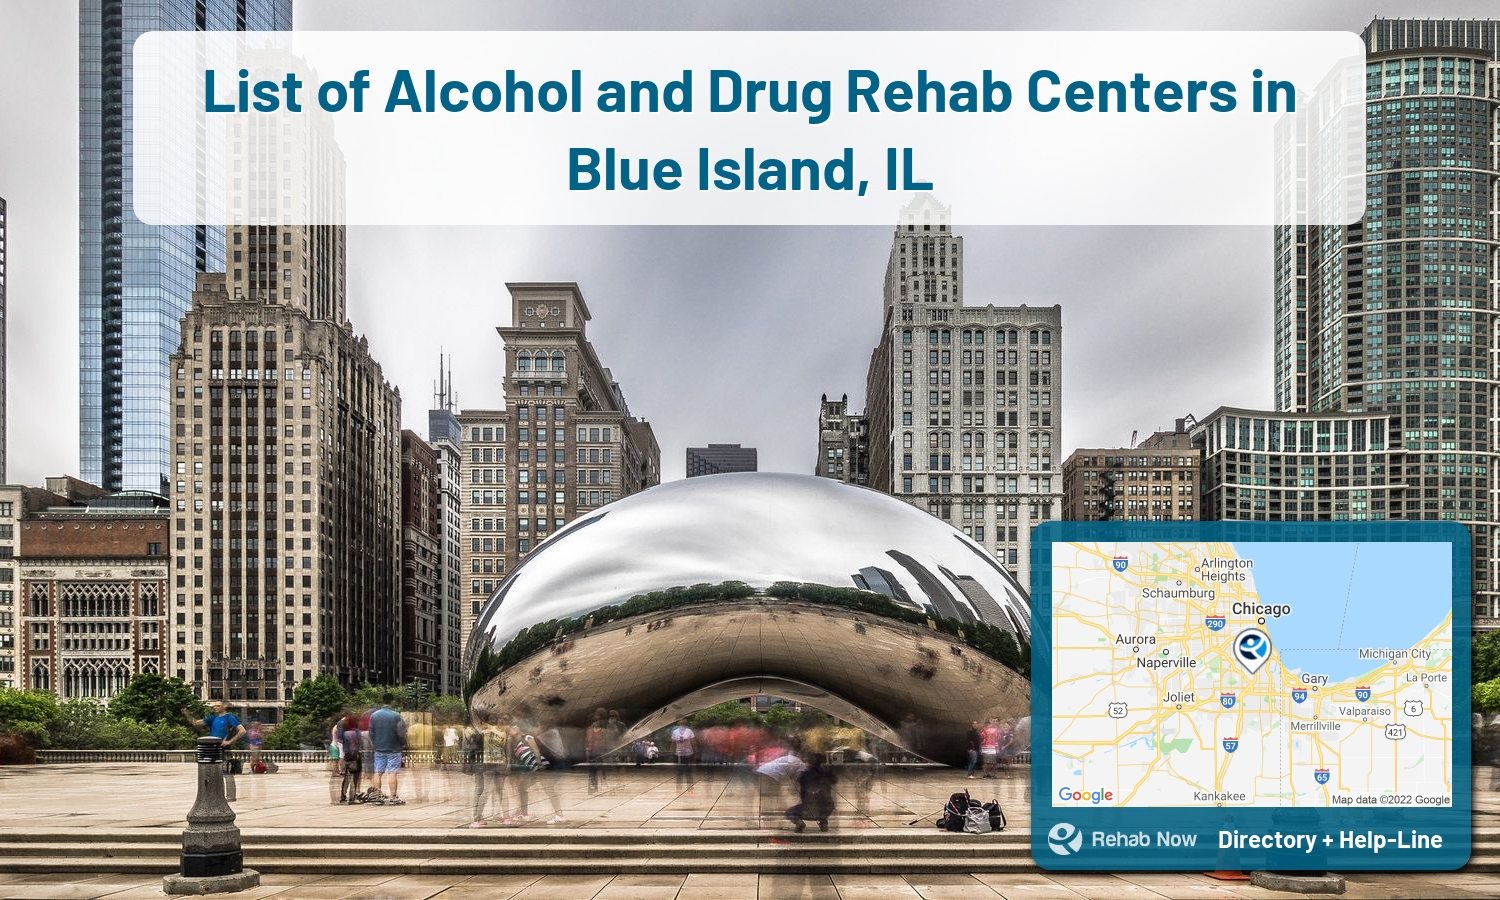 Blue Island, IL Treatment Centers. Find drug rehab in Blue Island, Illinois, or detox and treatment programs. Get the right help now!